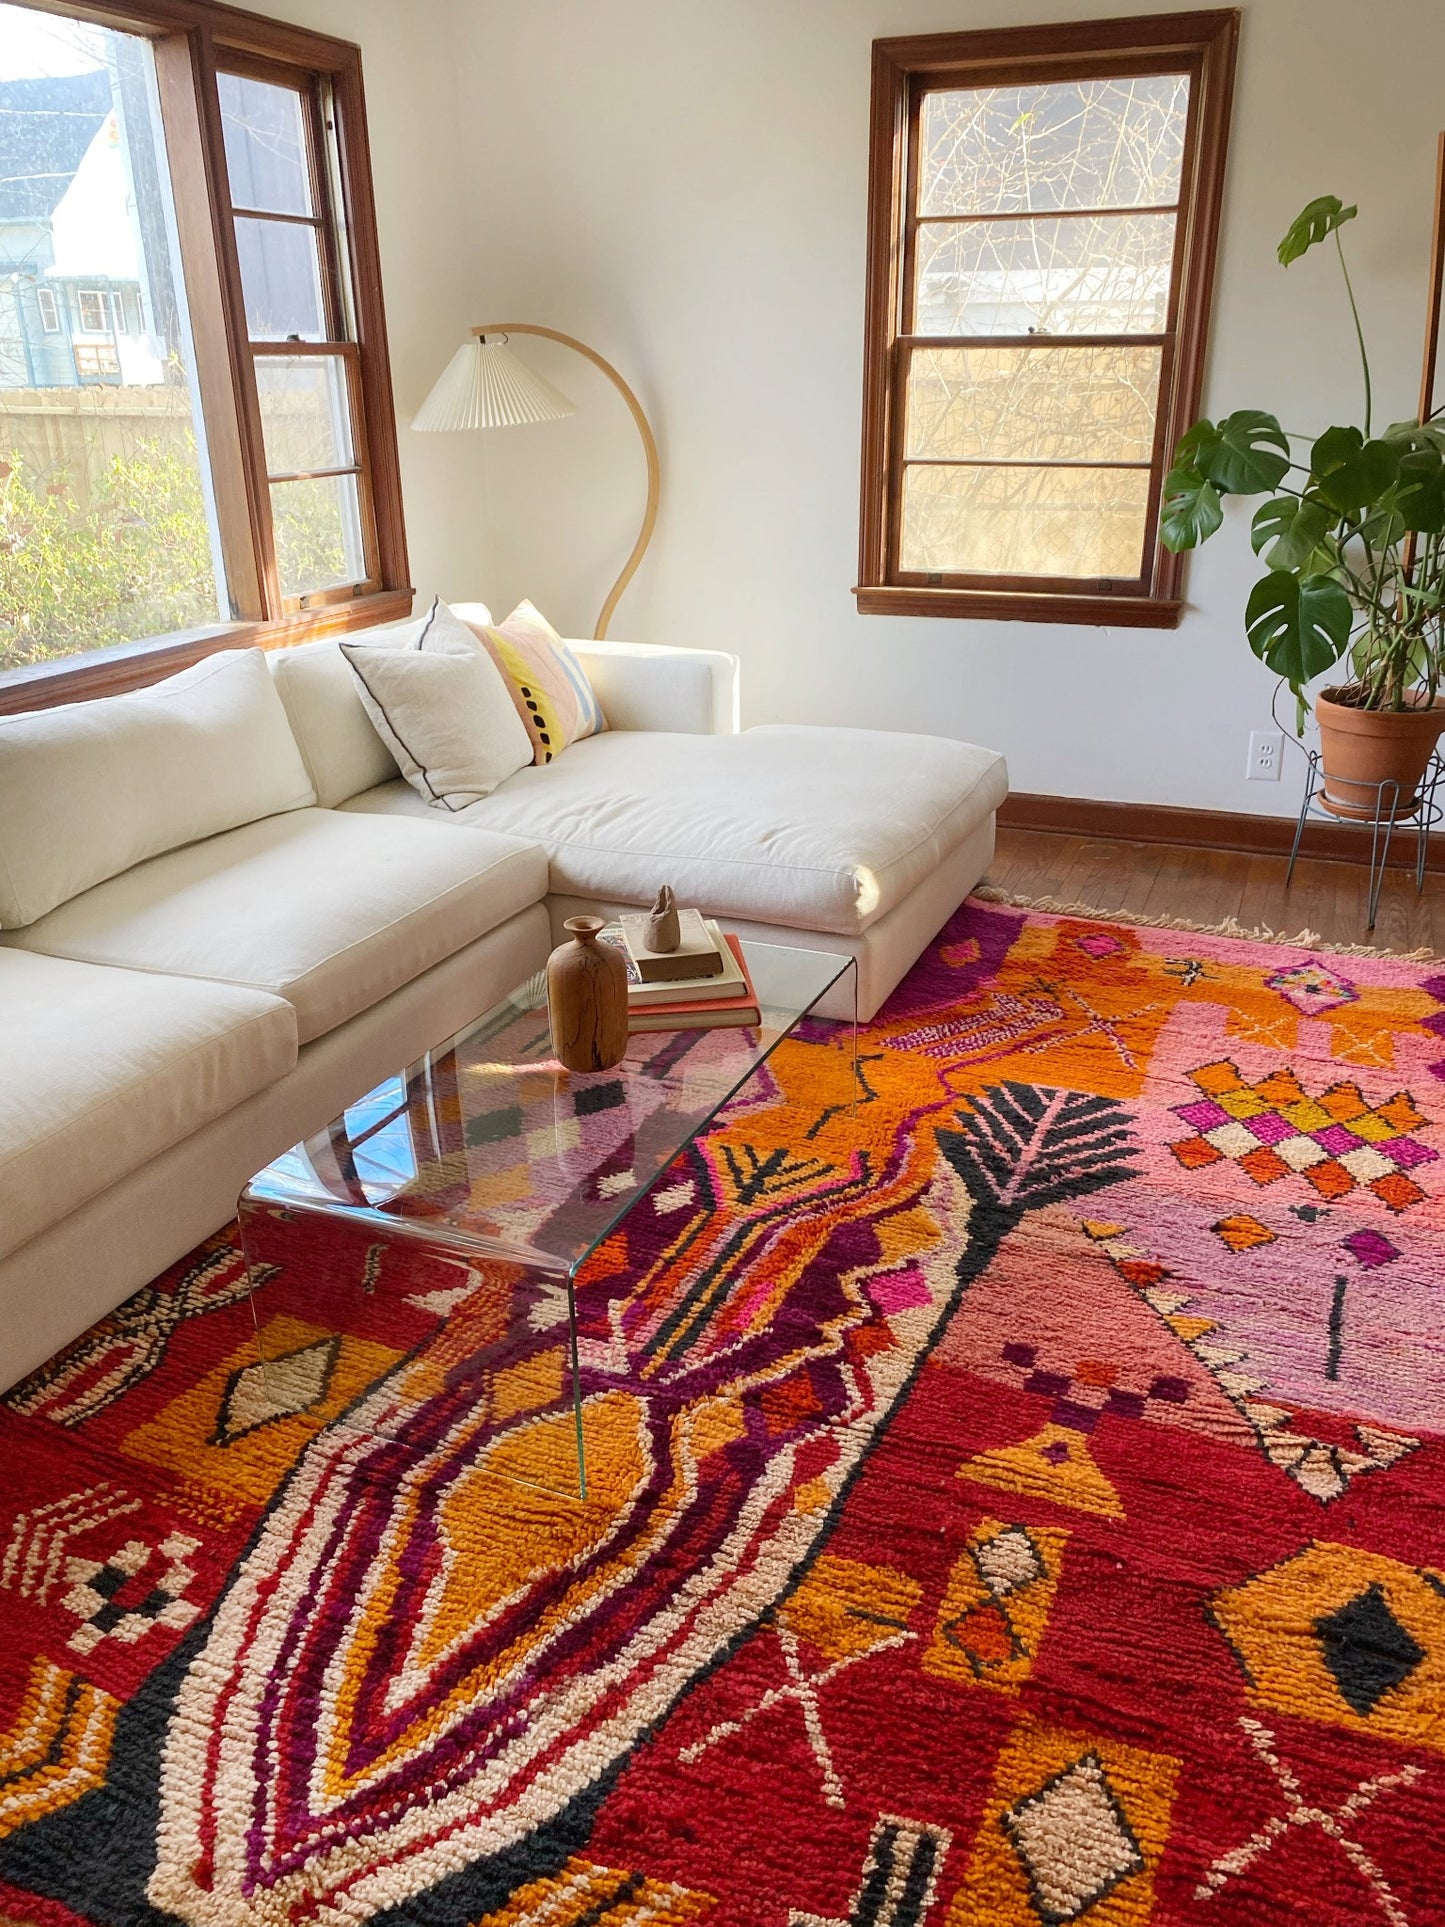 View Wedelia Moroccan Rug From an Angle in a Living Room